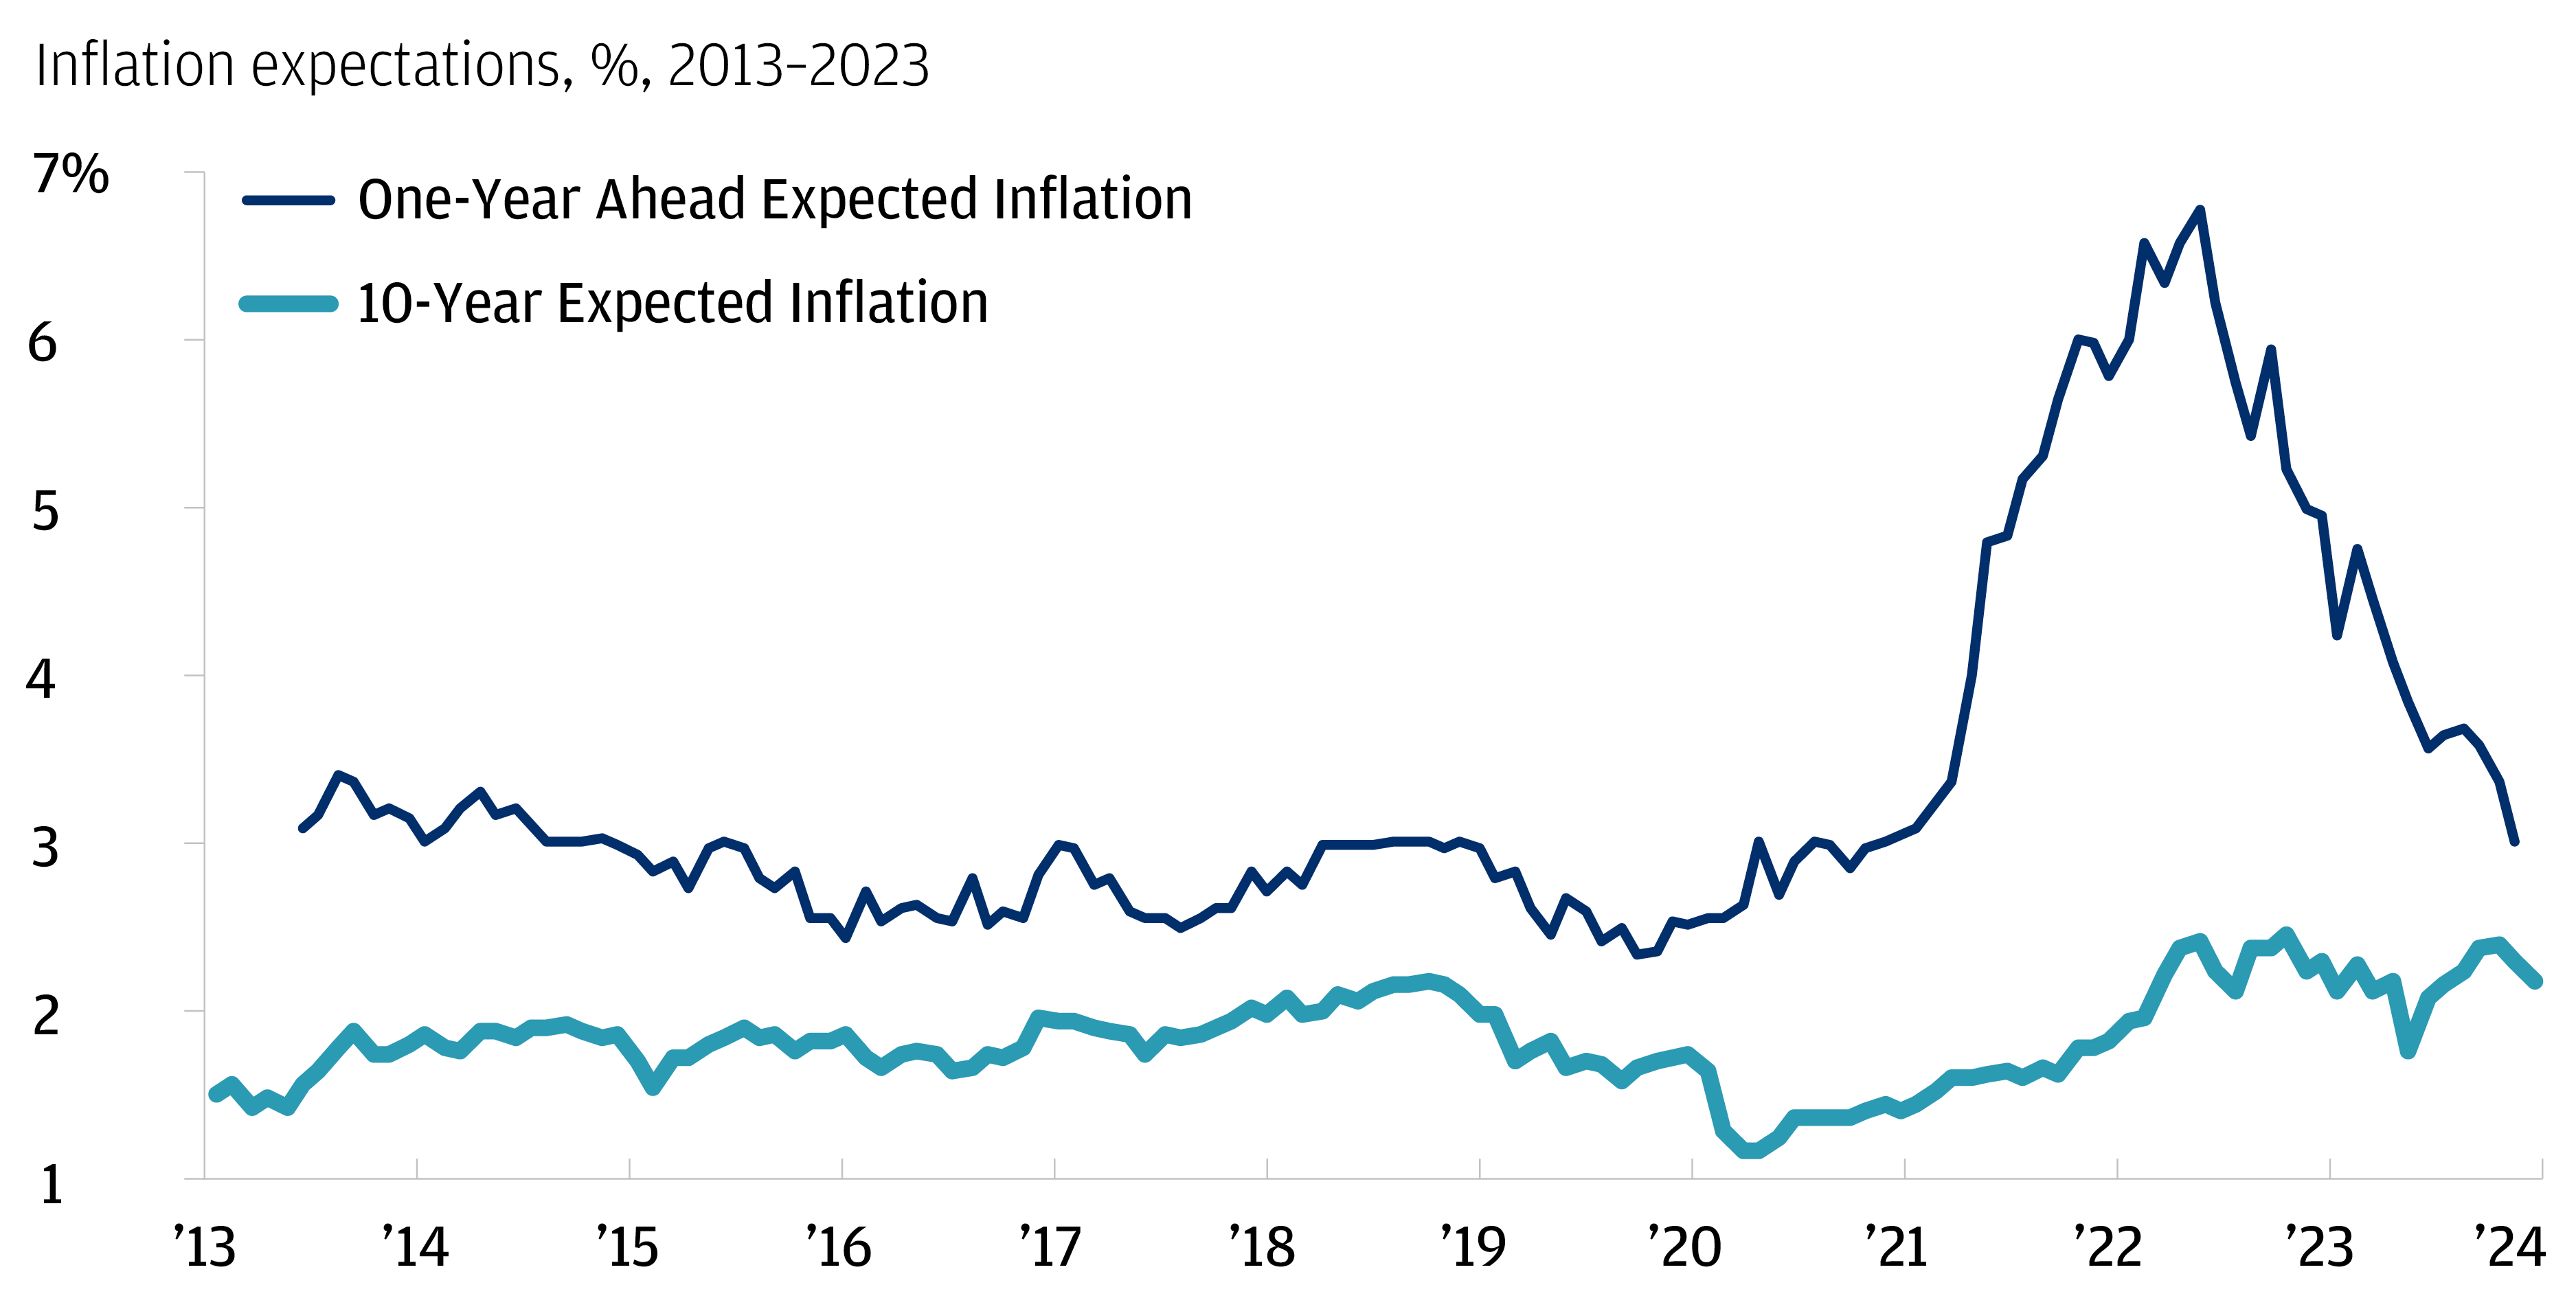 The chart describes the one-year ahead and 10-year ahead expected inflation in %. 